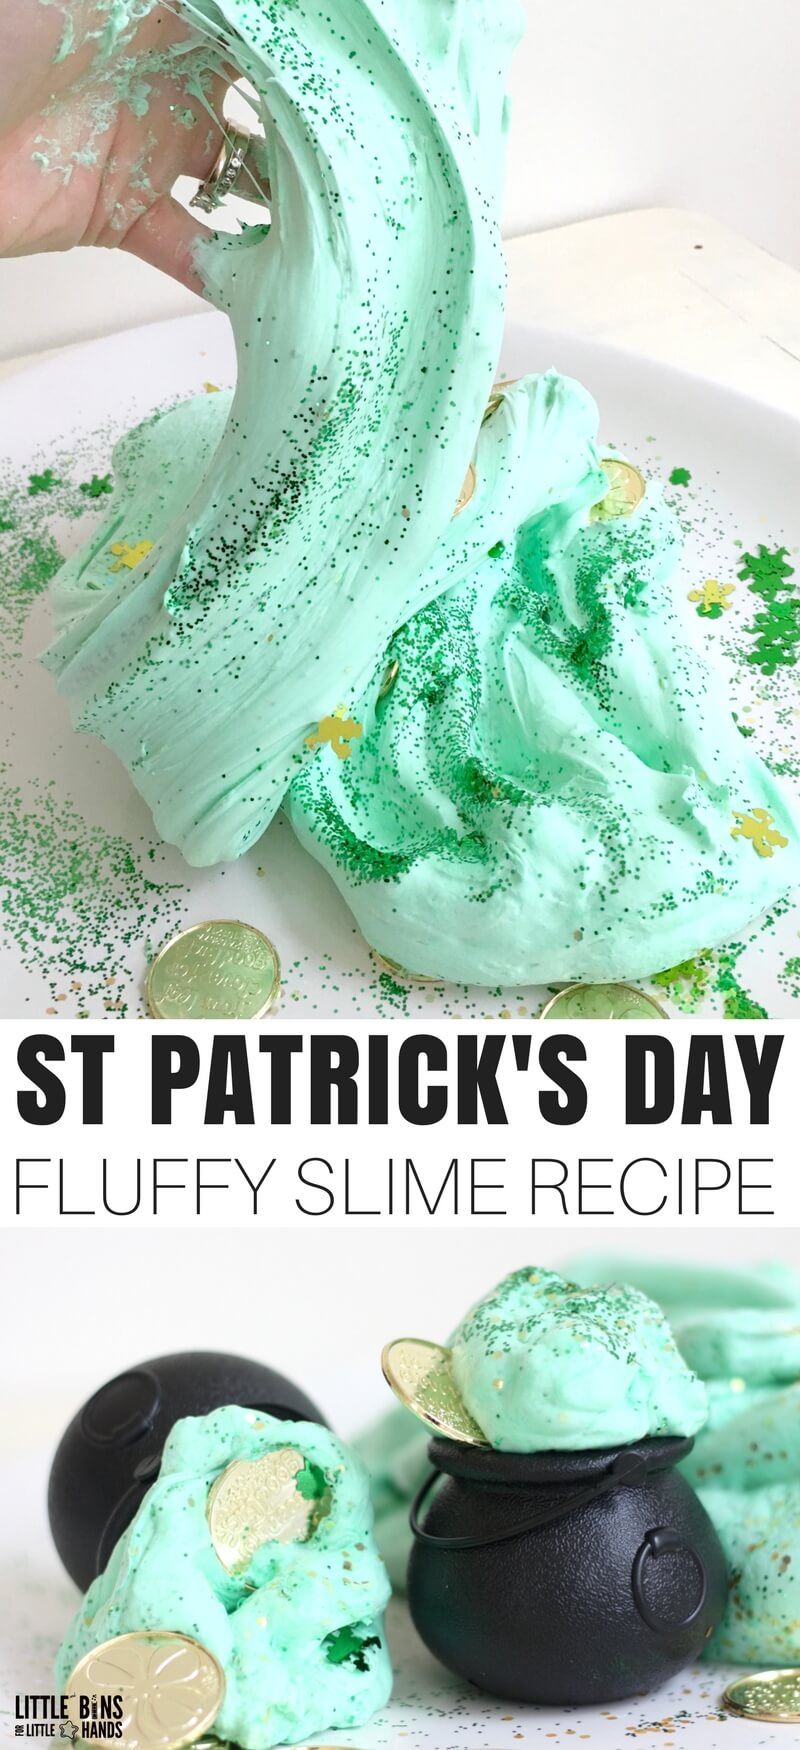 This lucky leprechaun got to make a fresh batch of our homemade fluffy slime this week! If you haven't made fluffy slime then you are in for a real treat, and if you have already then you know how awesome homemade slime is! Today we bring you a brand new theme, a fluffy St Patricks Day slime recipe! Glitter, leprechauns, gold coins, and more!